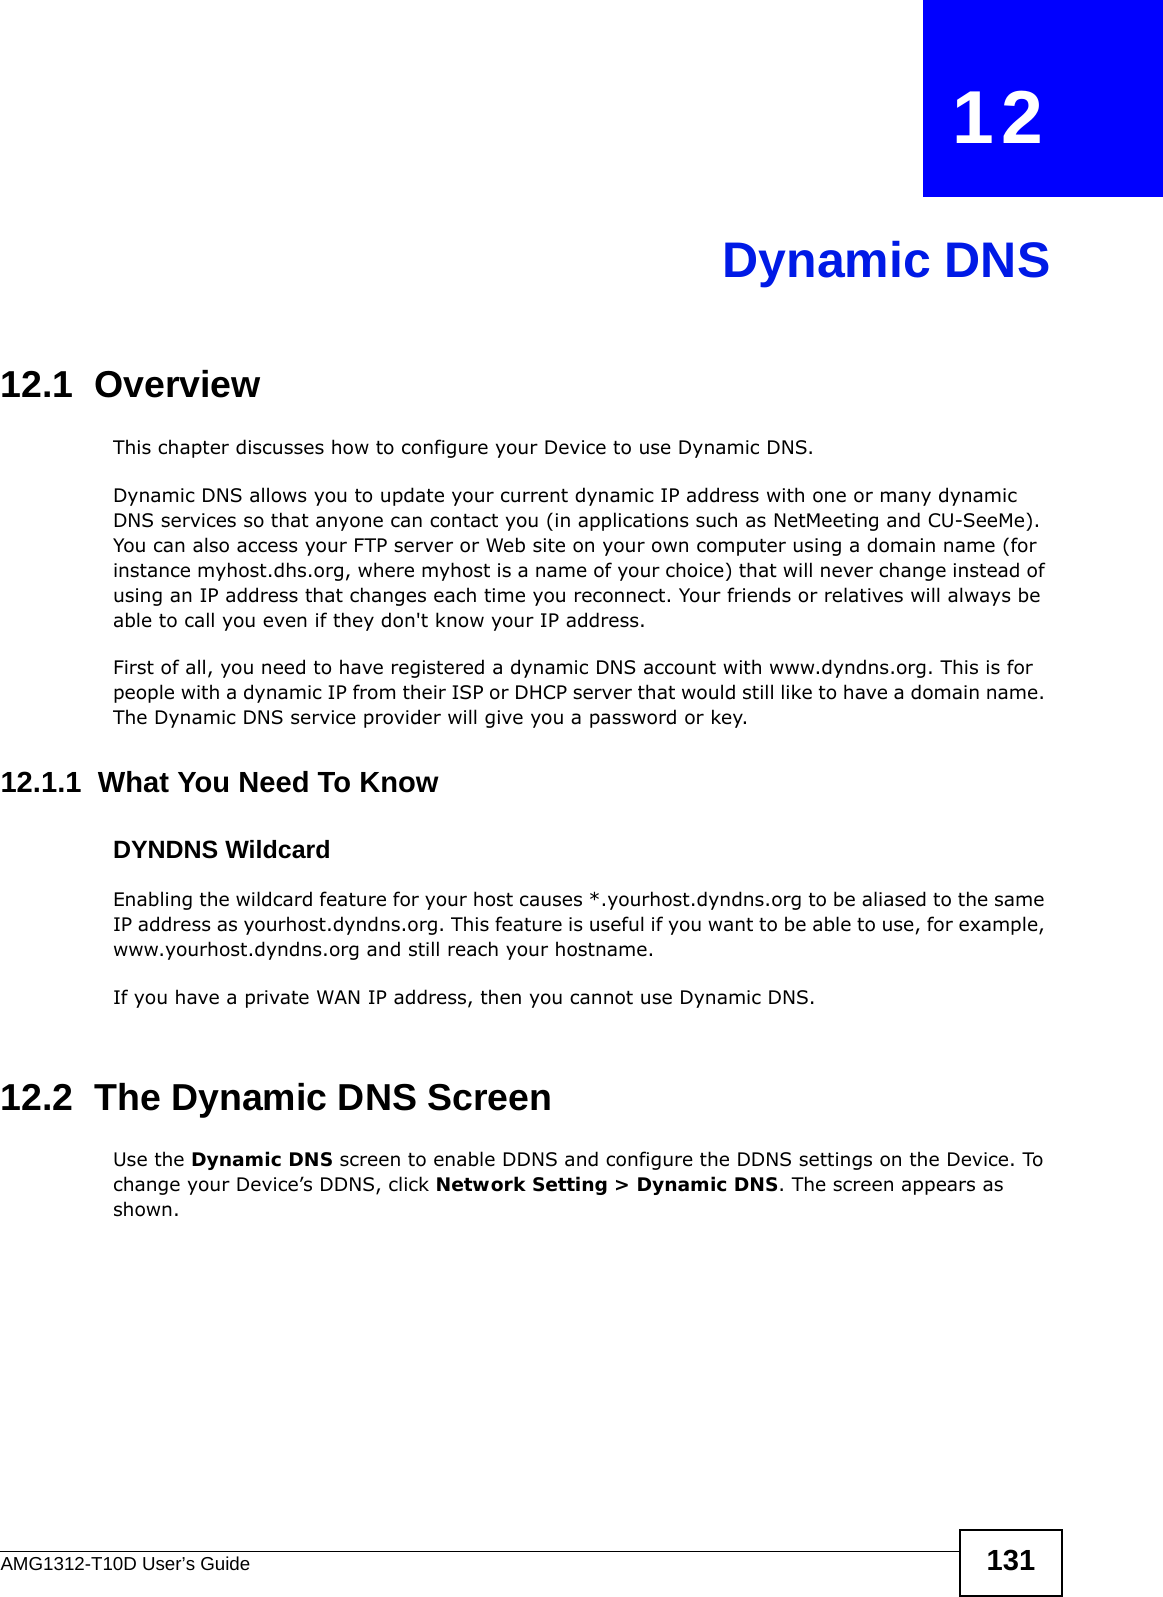 AMG1312-T10D User’s Guide 131CHAPTER   12Dynamic DNS12.1  Overview This chapter discusses how to configure your Device to use Dynamic DNS.Dynamic DNS allows you to update your current dynamic IP address with one or many dynamic DNS services so that anyone can contact you (in applications such as NetMeeting and CU-SeeMe). You can also access your FTP server or Web site on your own computer using a domain name (for instance myhost.dhs.org, where myhost is a name of your choice) that will never change instead of using an IP address that changes each time you reconnect. Your friends or relatives will always be able to call you even if they don&apos;t know your IP address.First of all, you need to have registered a dynamic DNS account with www.dyndns.org. This is for people with a dynamic IP from their ISP or DHCP server that would still like to have a domain name. The Dynamic DNS service provider will give you a password or key. 12.1.1  What You Need To KnowDYNDNS WildcardEnabling the wildcard feature for your host causes *.yourhost.dyndns.org to be aliased to the same IP address as yourhost.dyndns.org. This feature is useful if you want to be able to use, for example, www.yourhost.dyndns.org and still reach your hostname.If you have a private WAN IP address, then you cannot use Dynamic DNS.12.2  The Dynamic DNS ScreenUse the Dynamic DNS screen to enable DDNS and configure the DDNS settings on the Device. To change your Device’s DDNS, click Network Setting &gt; Dynamic DNS. The screen appears as shown. 